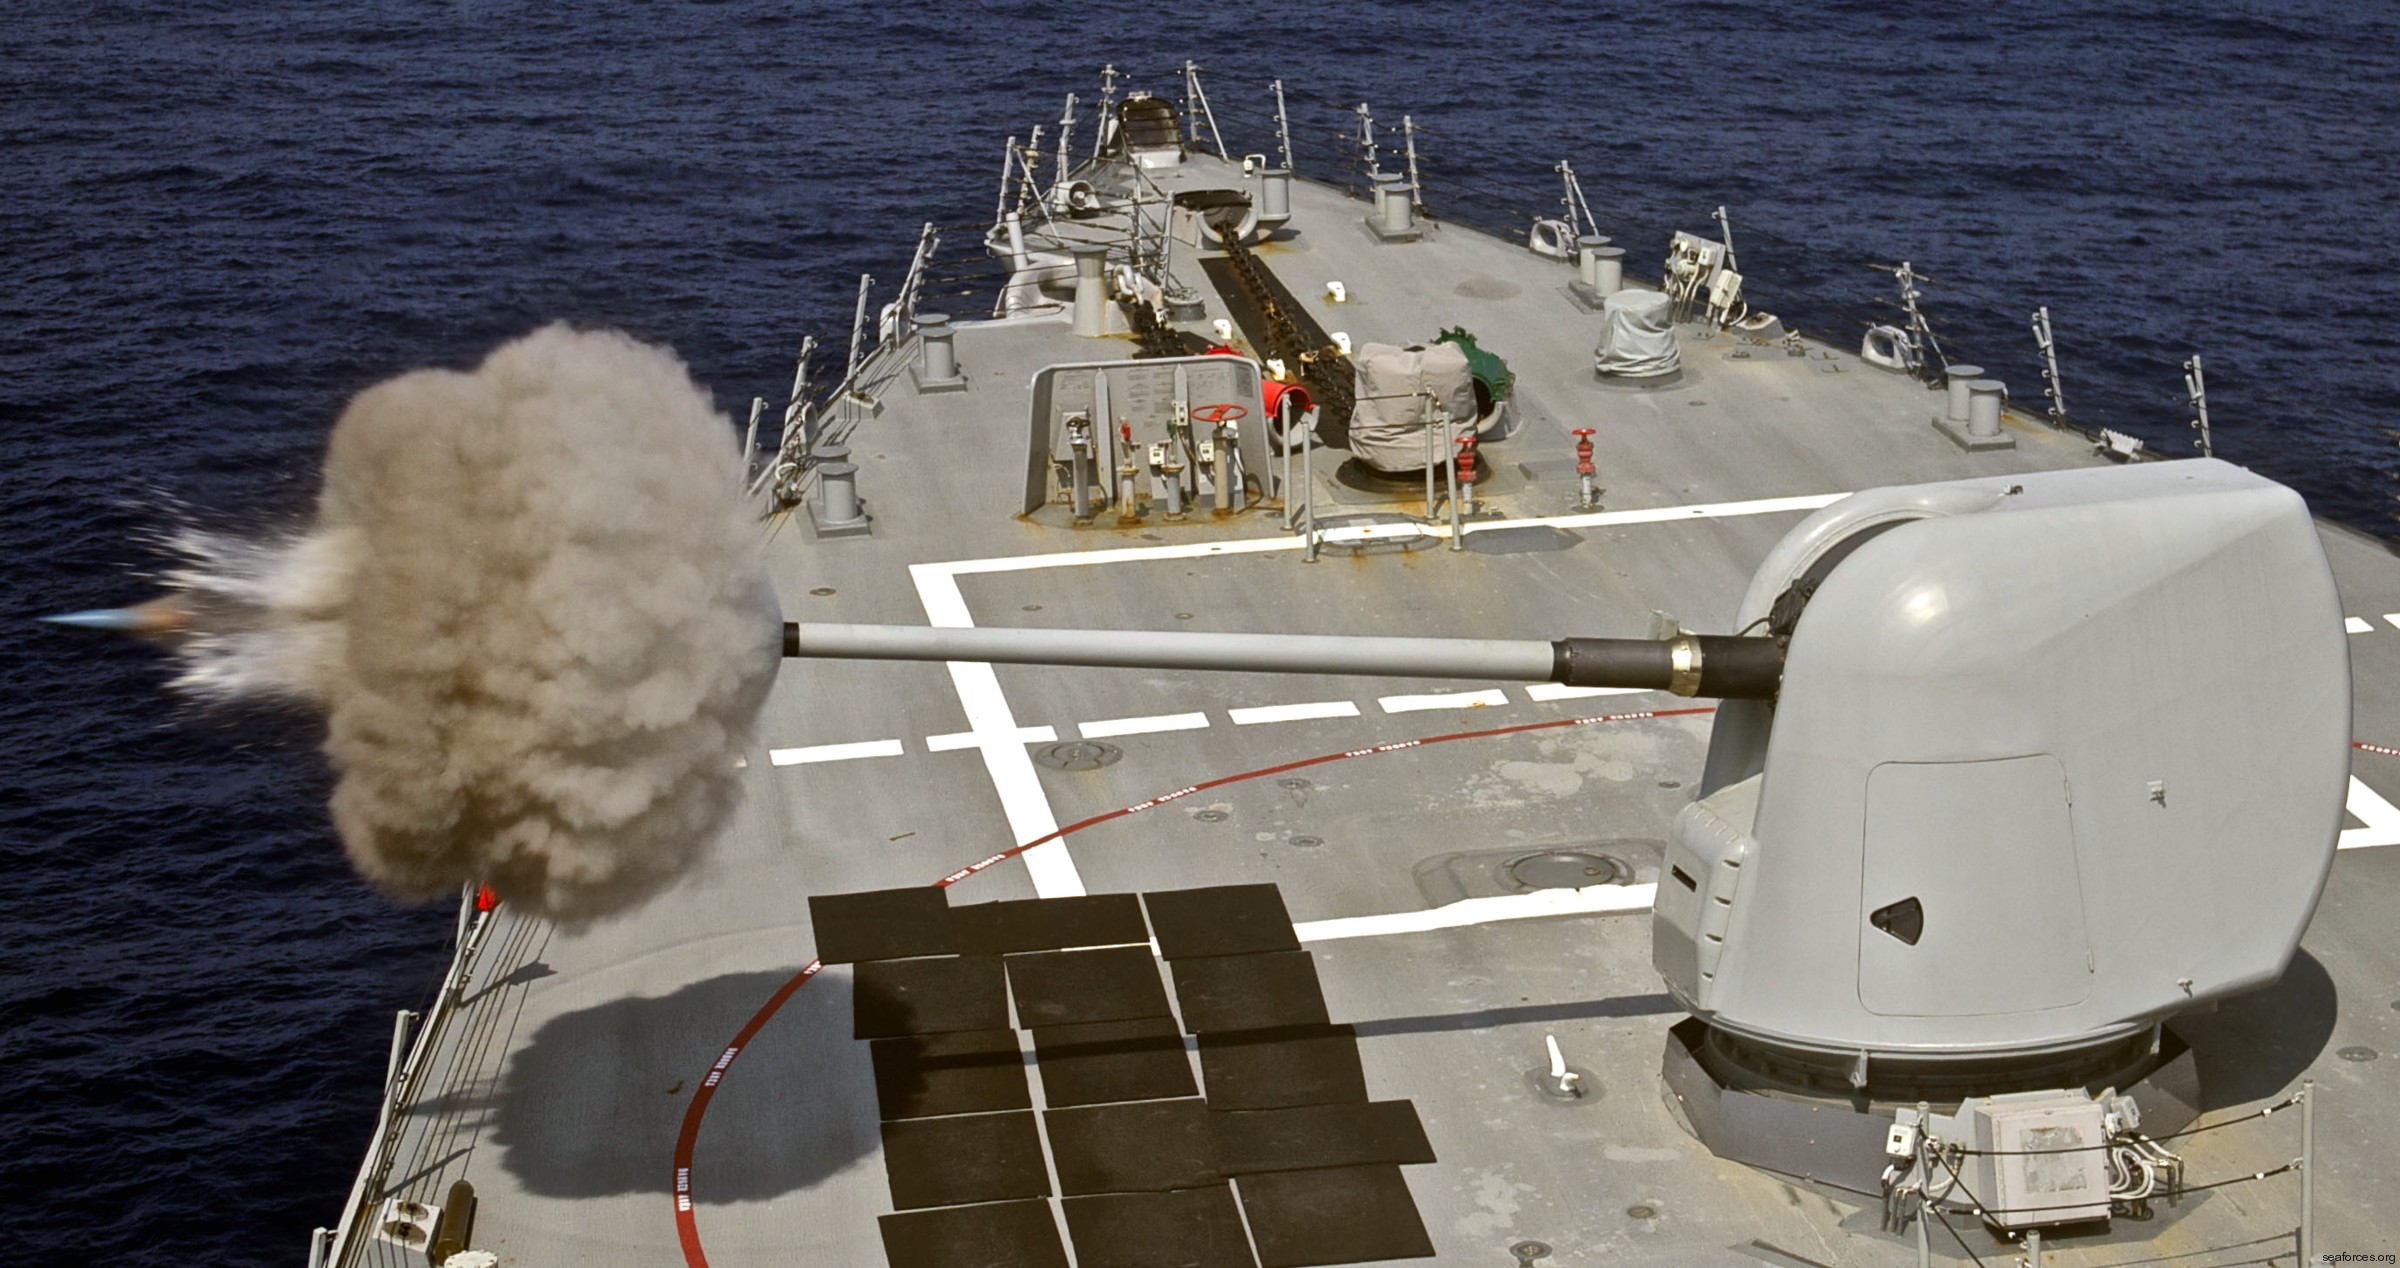 ddg-73 uss decatur guided missile destroyer arleigh burke class aegis bmd 08 mk. 45 gun fire exercise